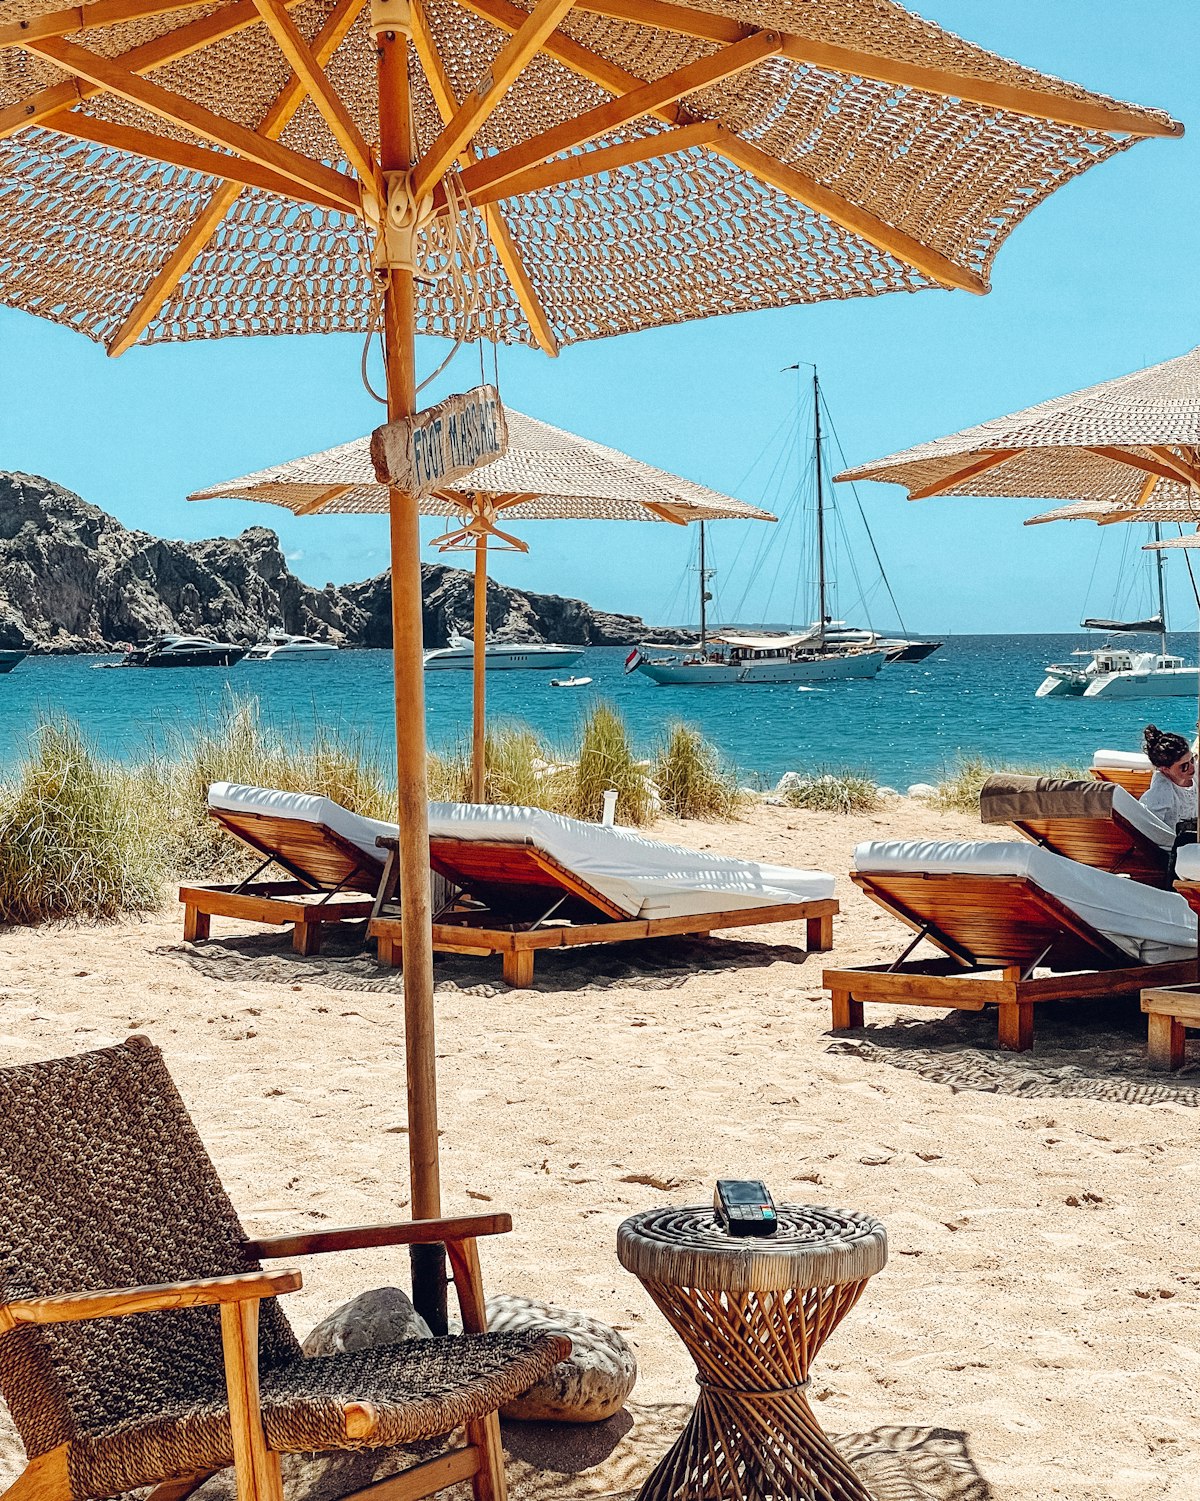 Ibiza: More Than Just a Party Island